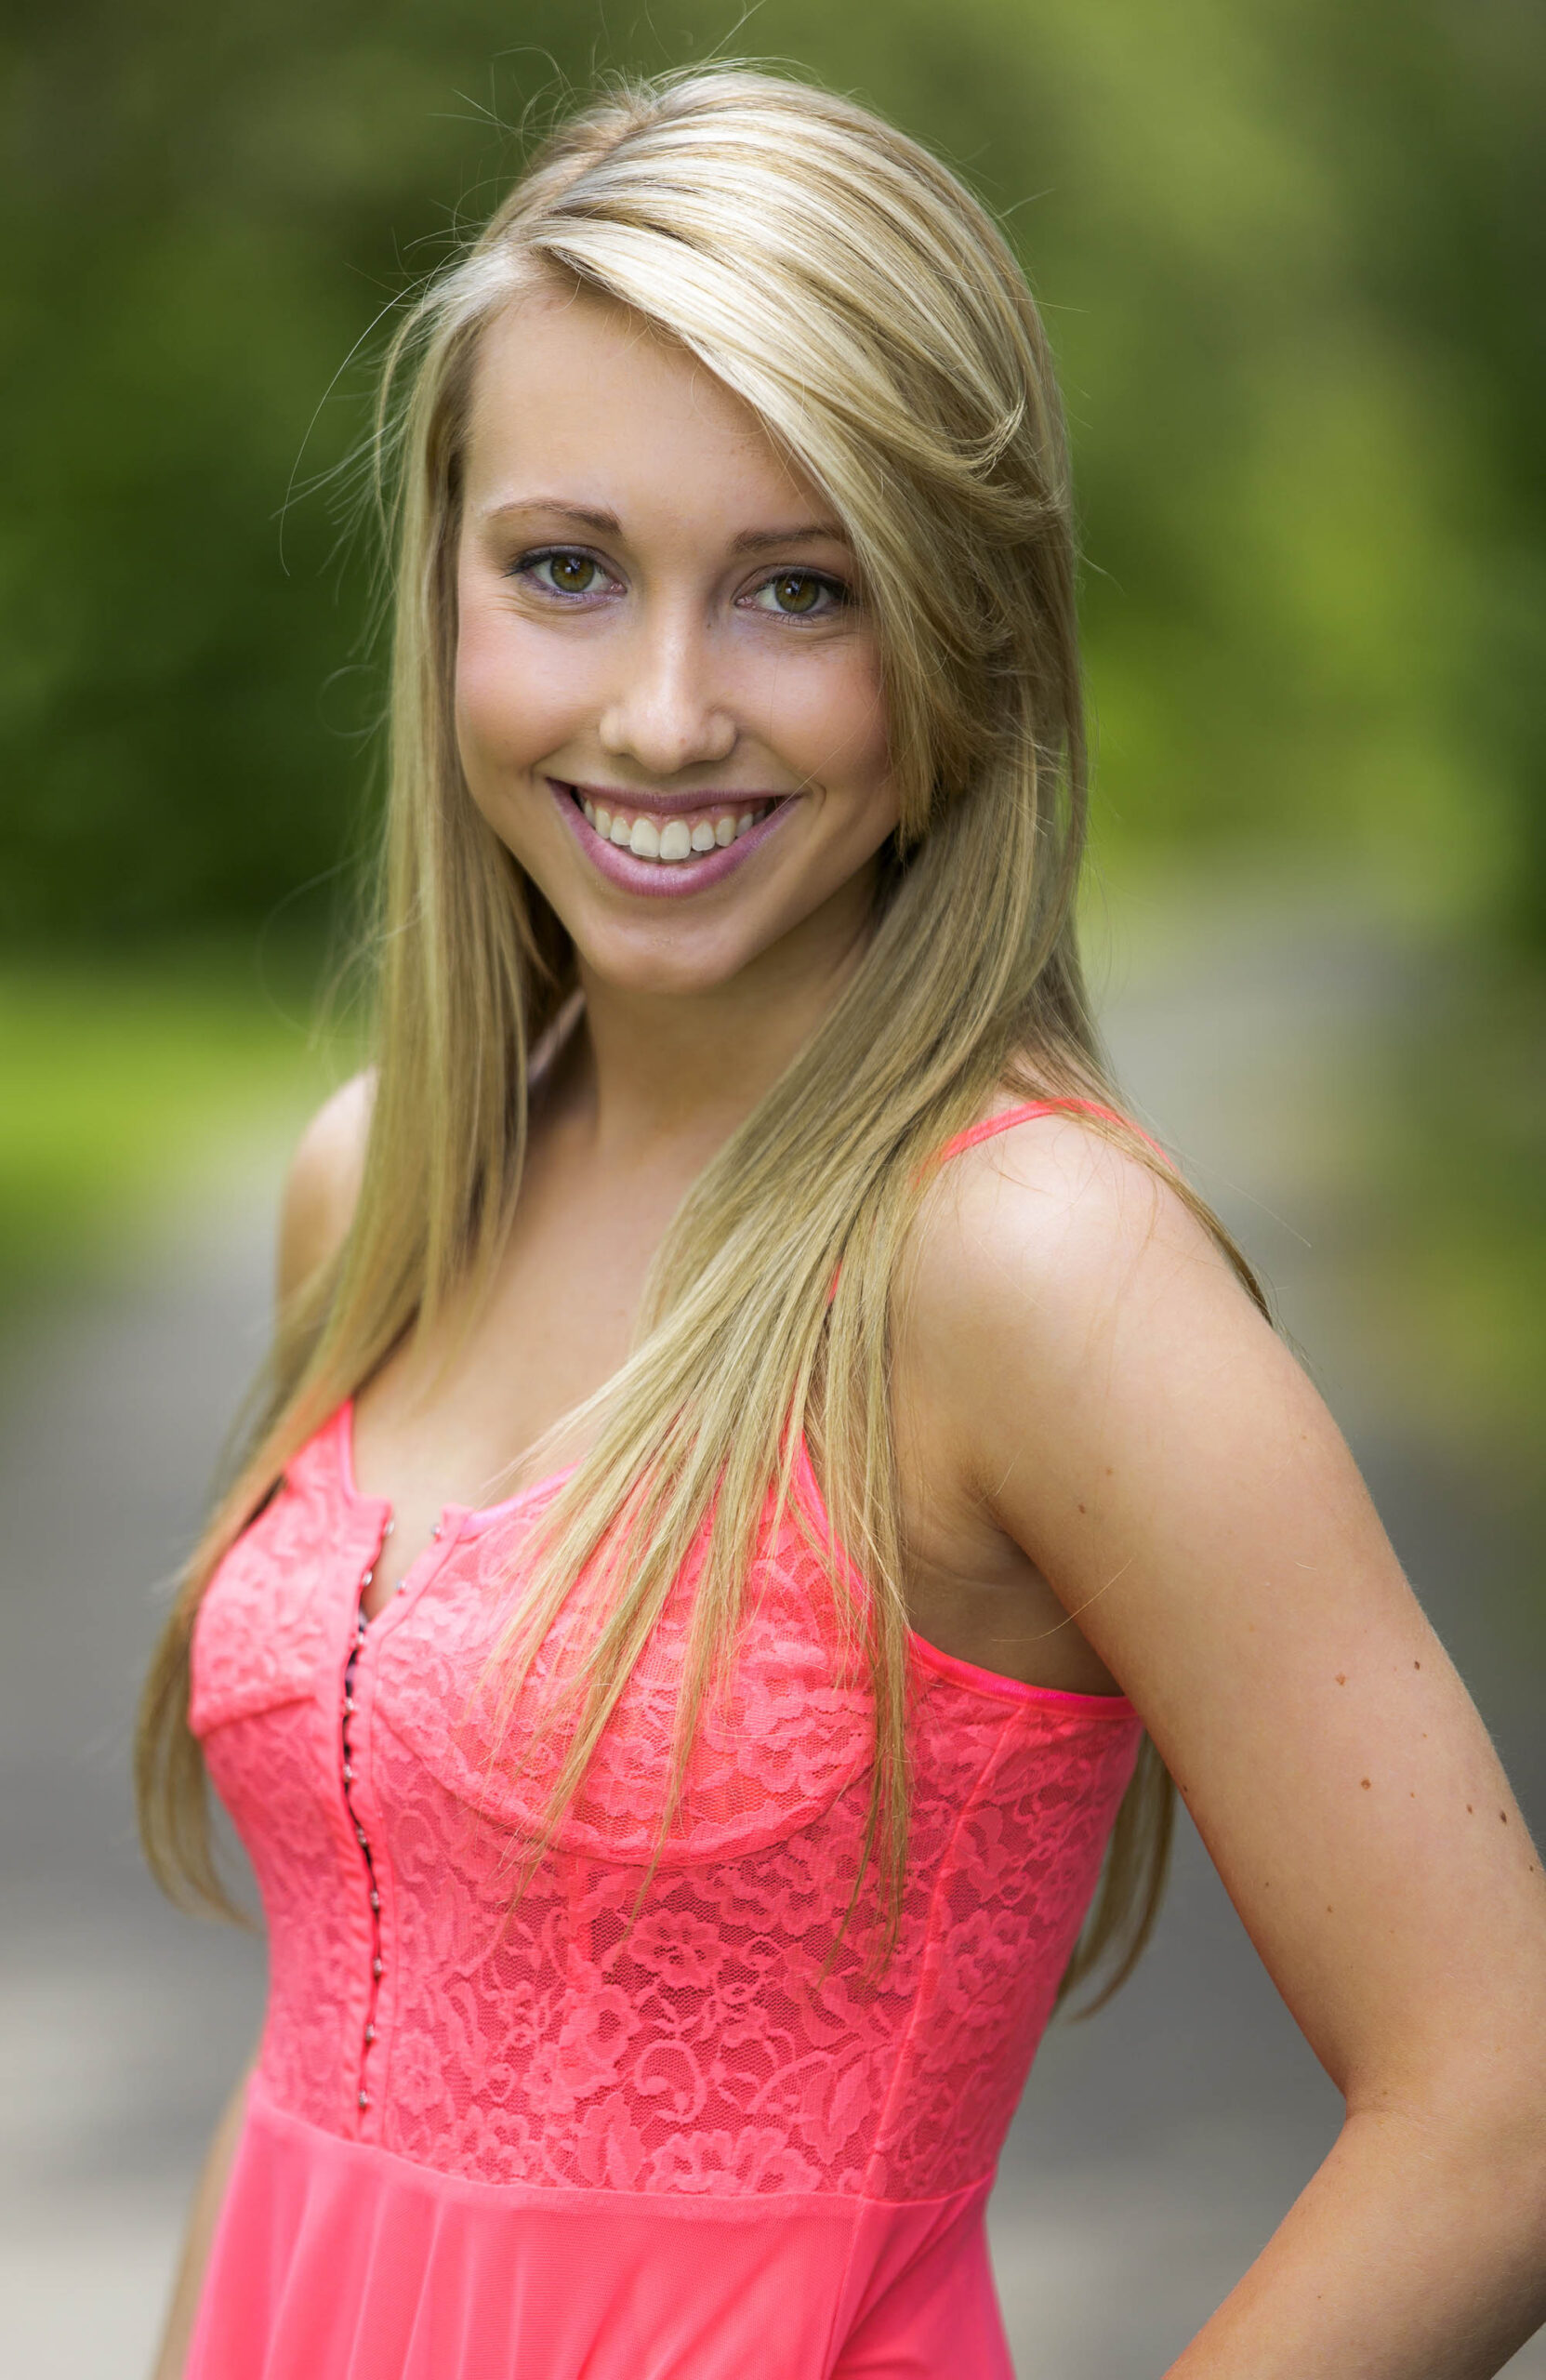 Young happy teen portrait smiling in a pink dress